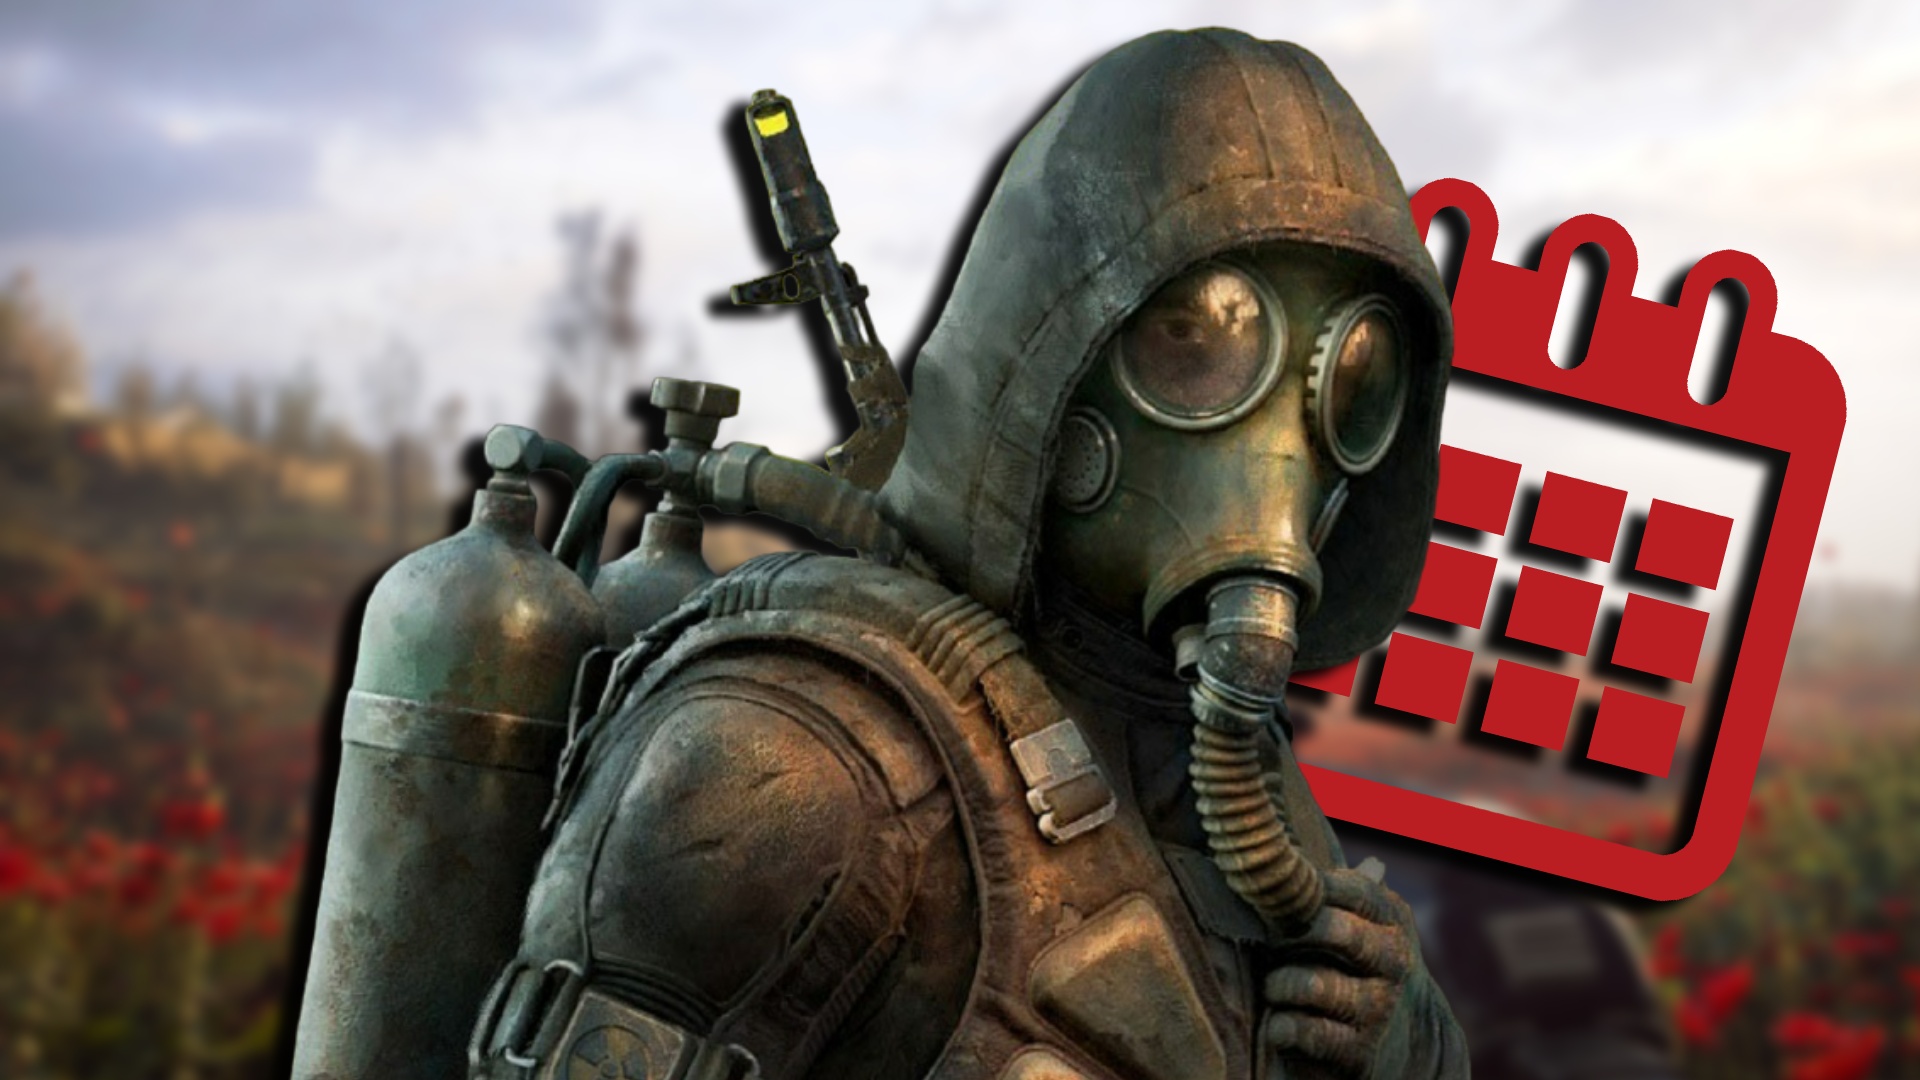 S.T.A.L.K.E.R. 2: Heart of Chornobyl Receives New Teaser About NON